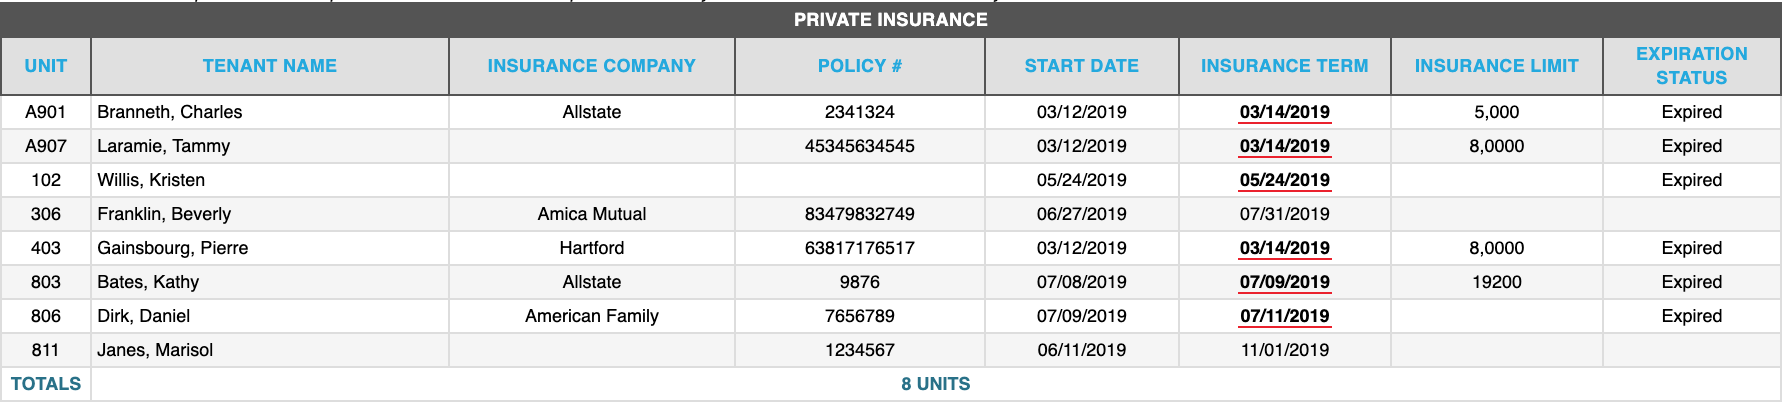 Private_Insurance_-_from_report.png